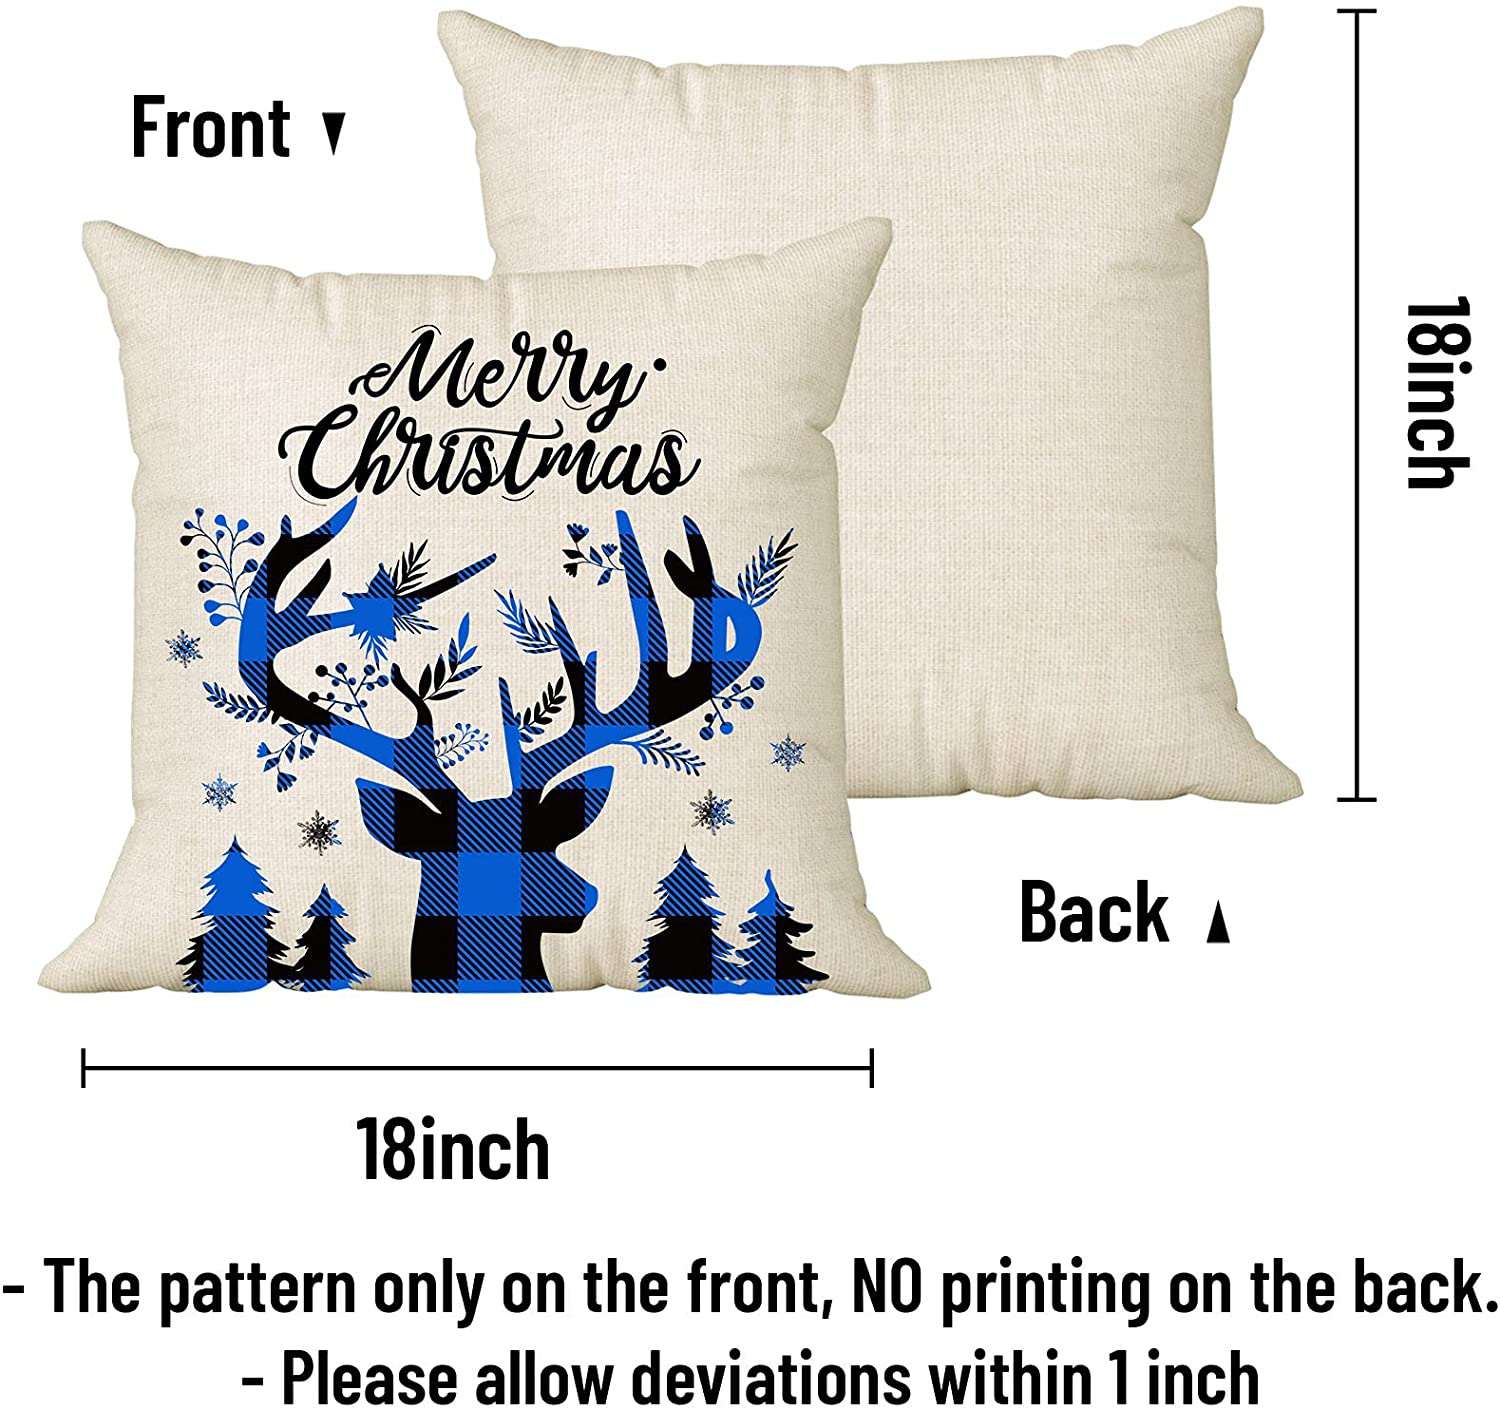 Set of 4 Christmas Pillow Covers 18x18 with 4 Bonus Coasters (Blue, Truck, Reindeer)